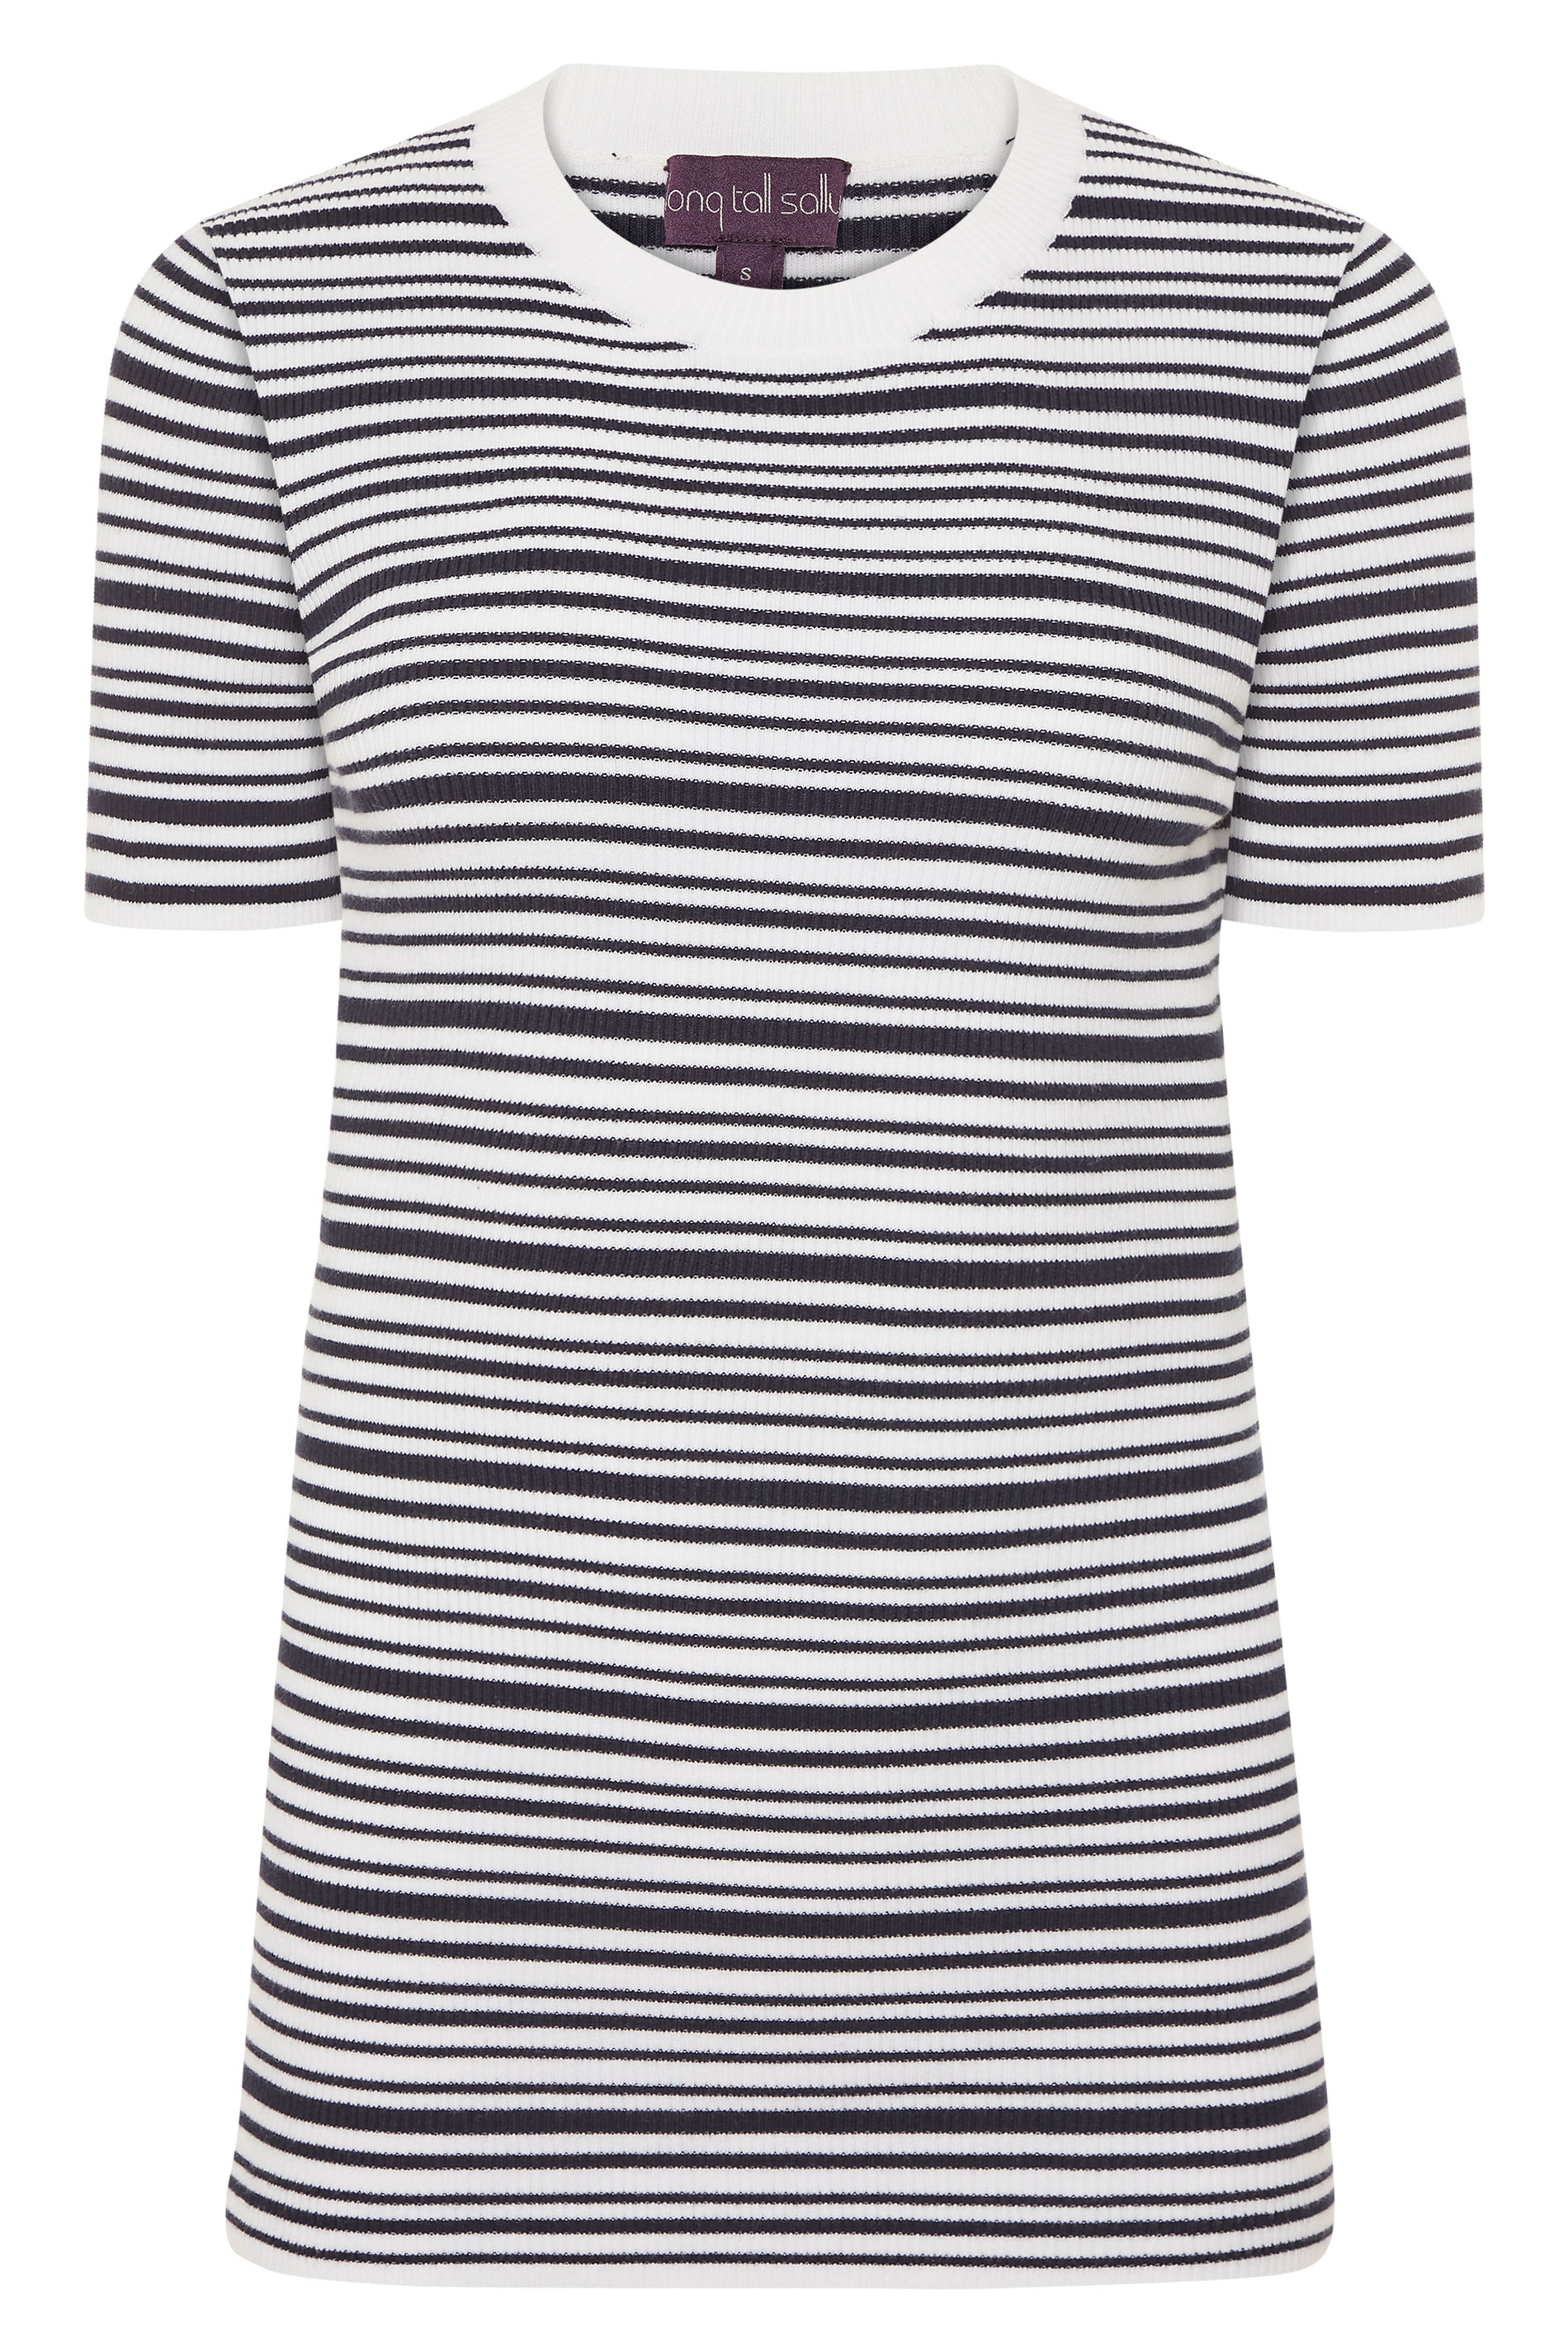 Navy & White Stripe Short Sleeve Knitted Top | Long Tall Sally